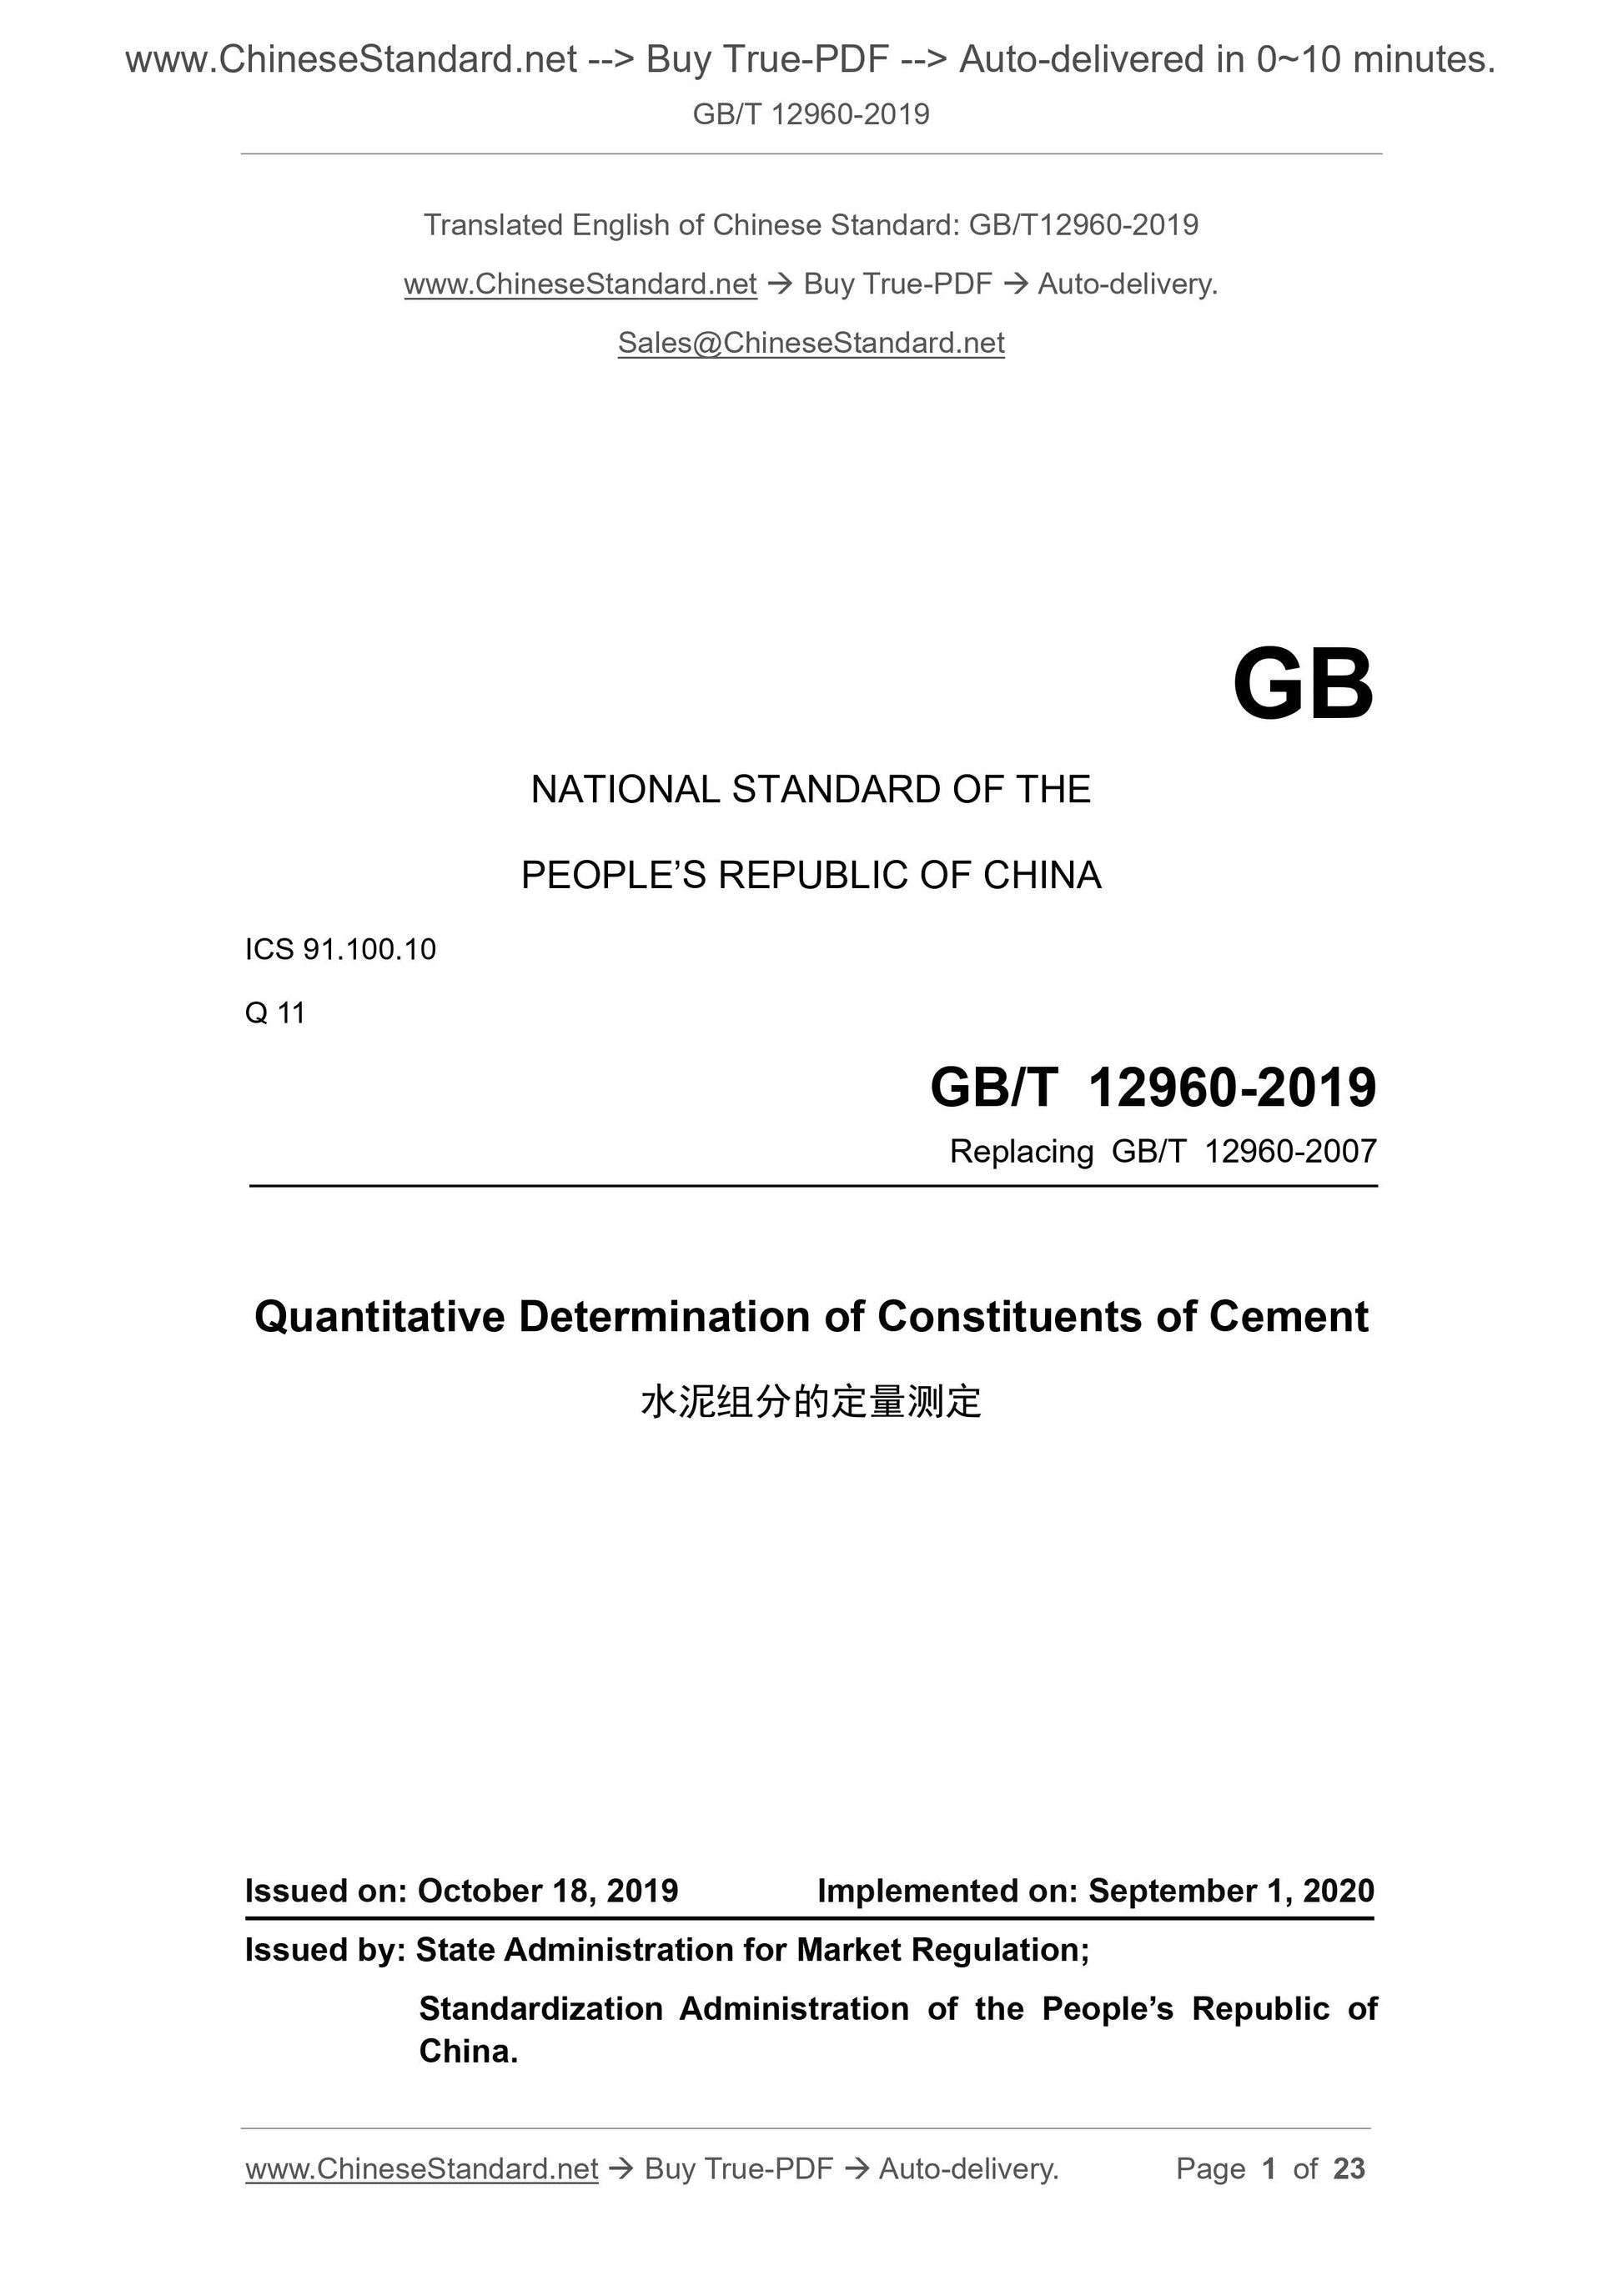 GB/T 12960-2019 Page 1